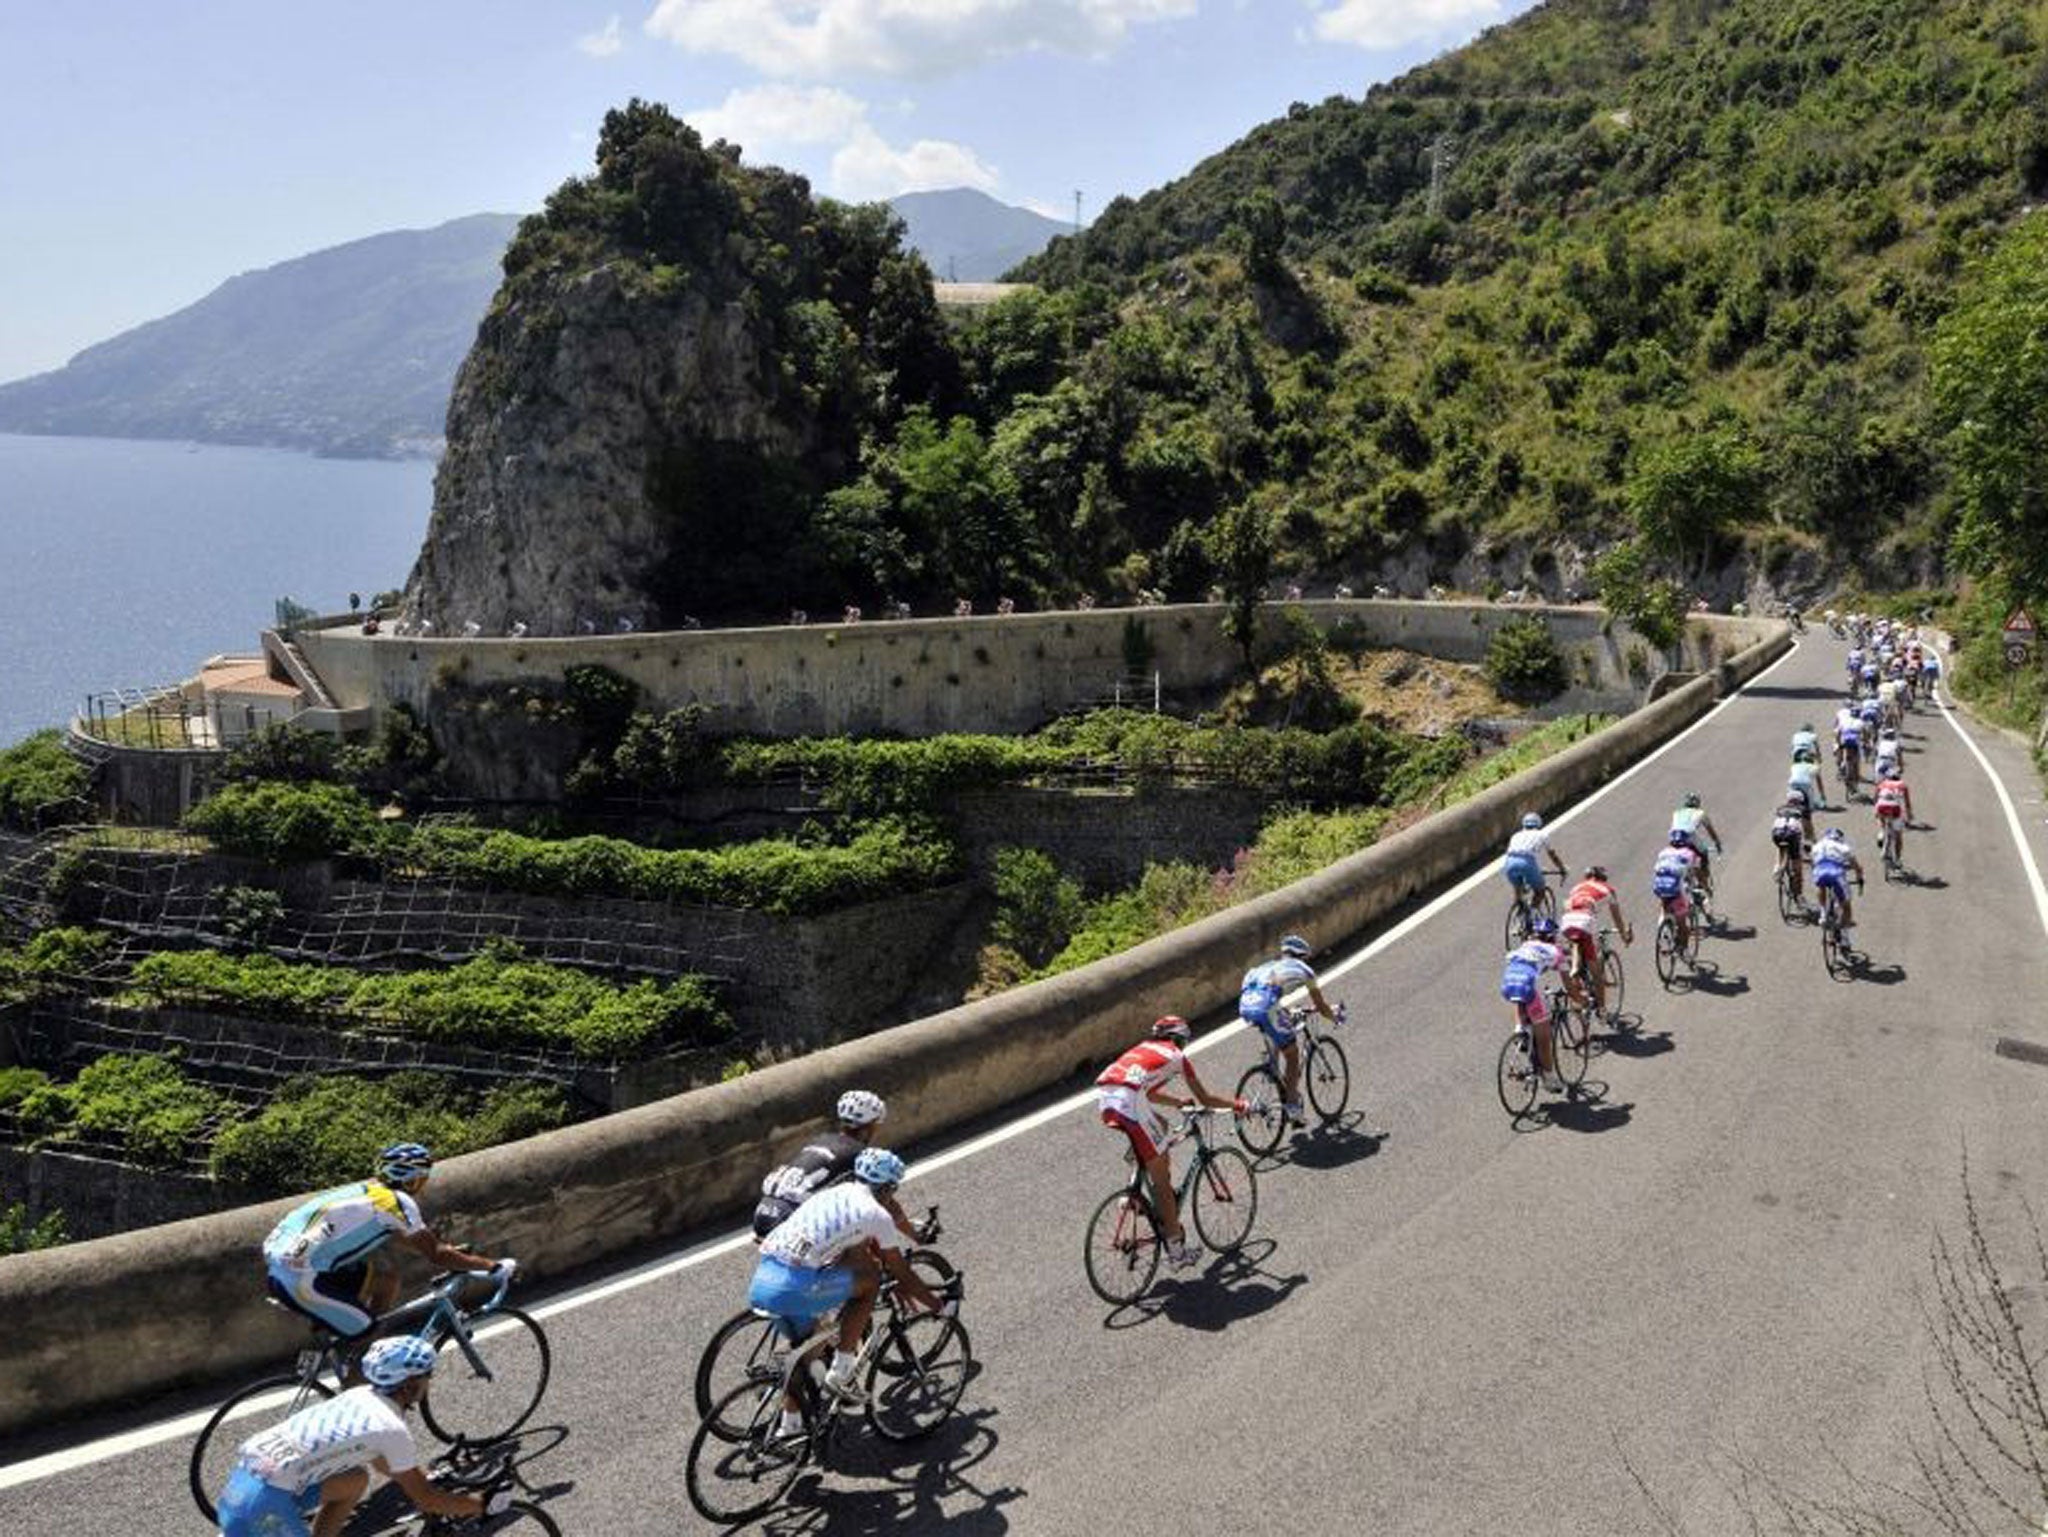 Glorious scenery and a race to relish – the Giro has it all